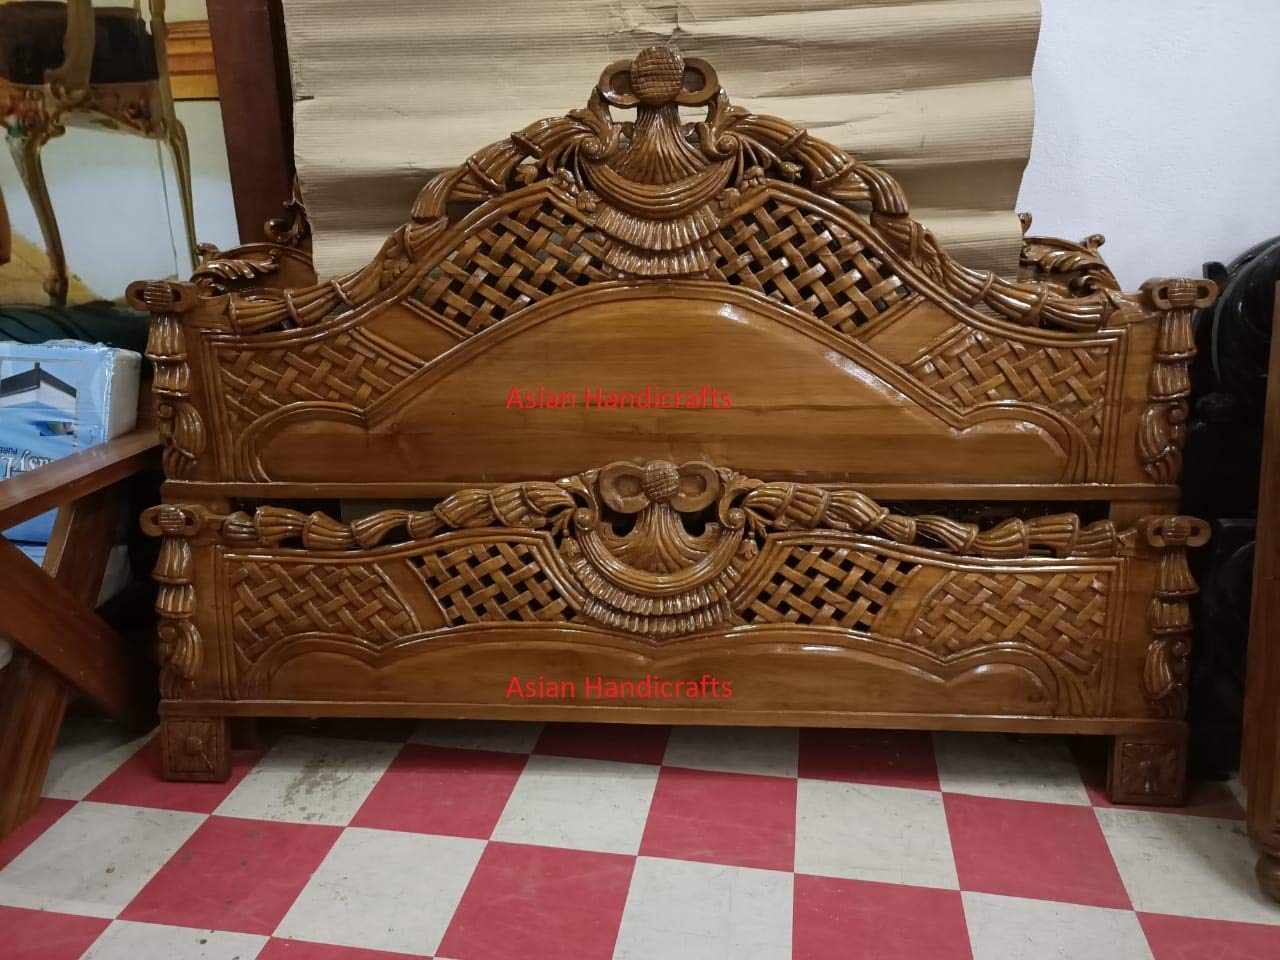 Asian Handicrafts Wooden Teak Wood King Size Bed with Storage Box, Bed Room Furniture, Furniture